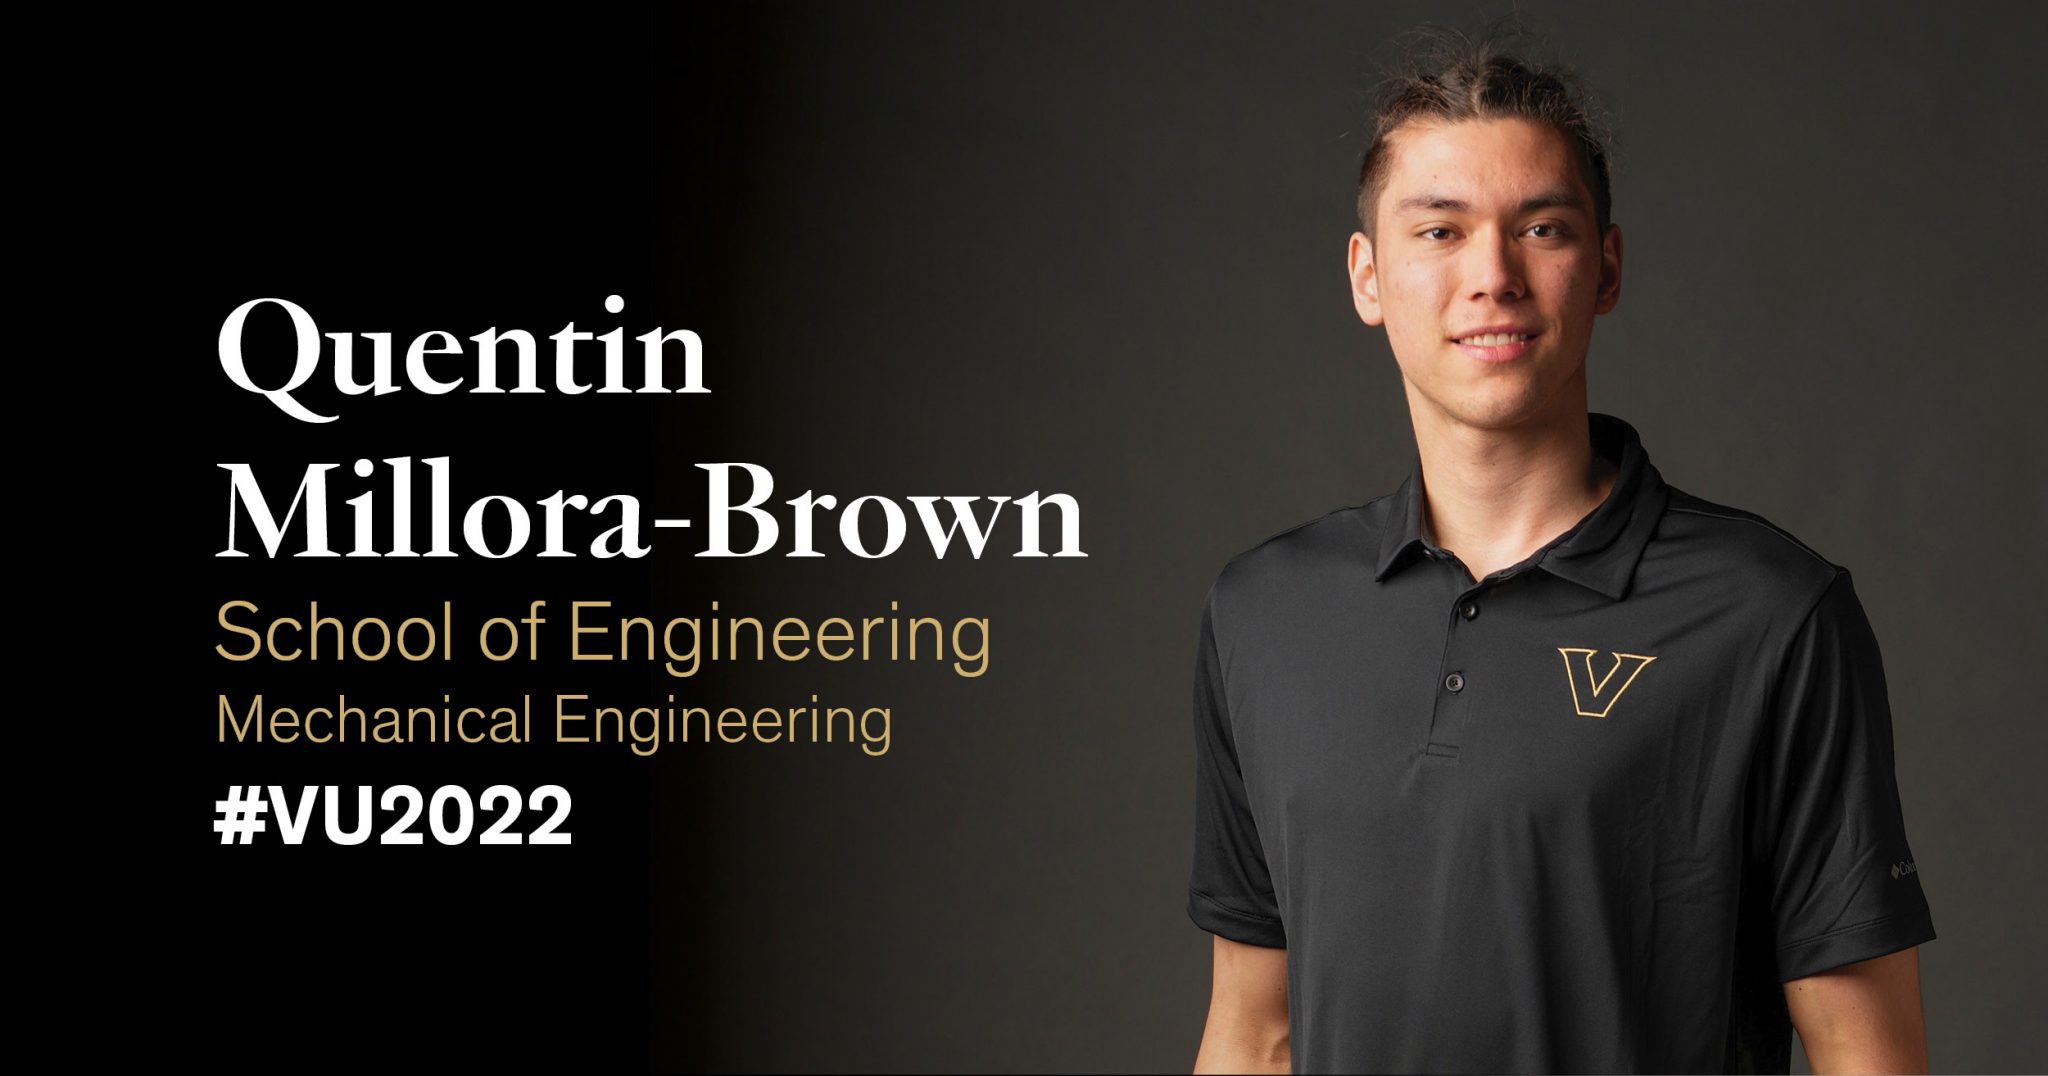 Class of 2022: Quentin Millora-Brown willing to play his role in engineering climate change solutions